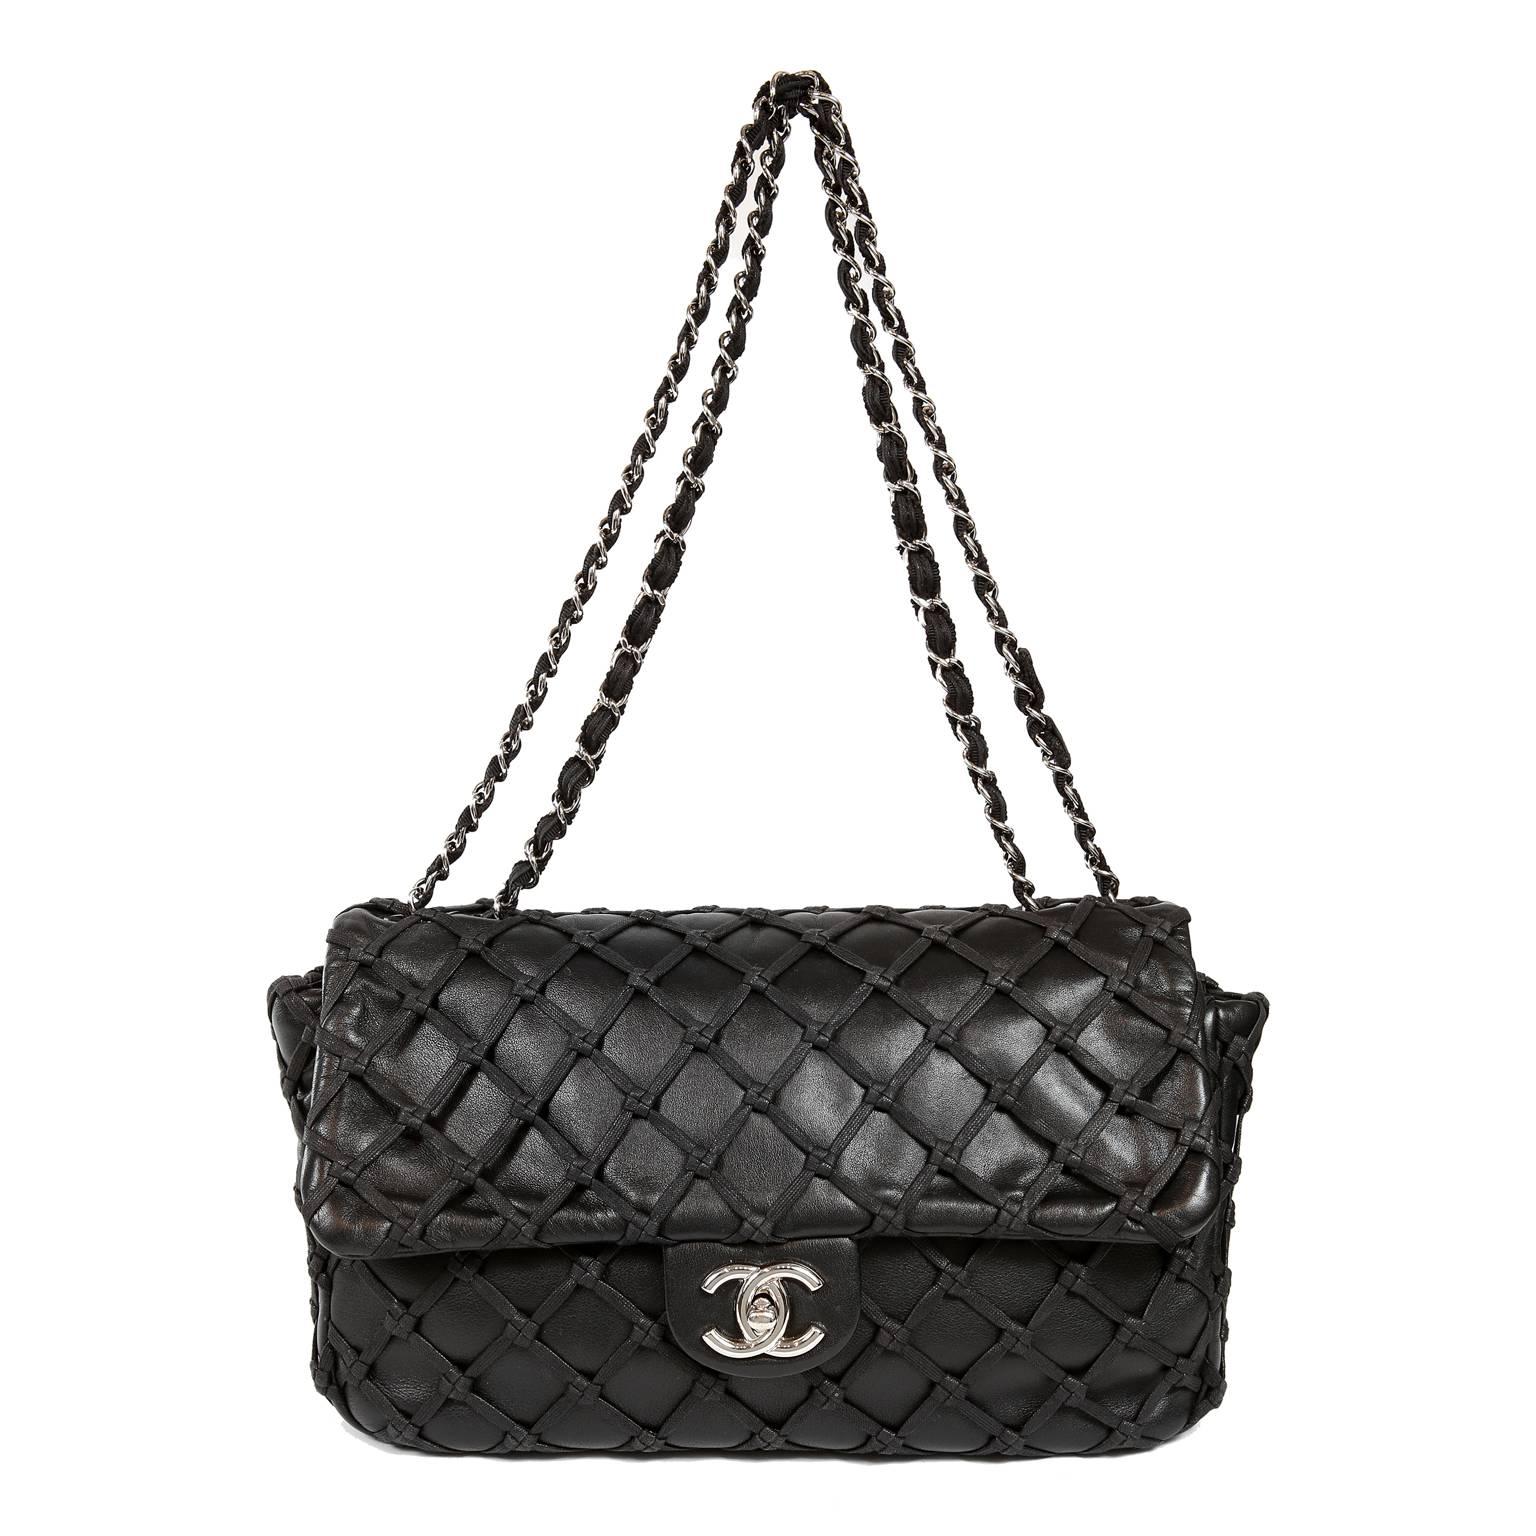 Chanel Black Leather Woven Top Stitch Classic Flap Bag 11